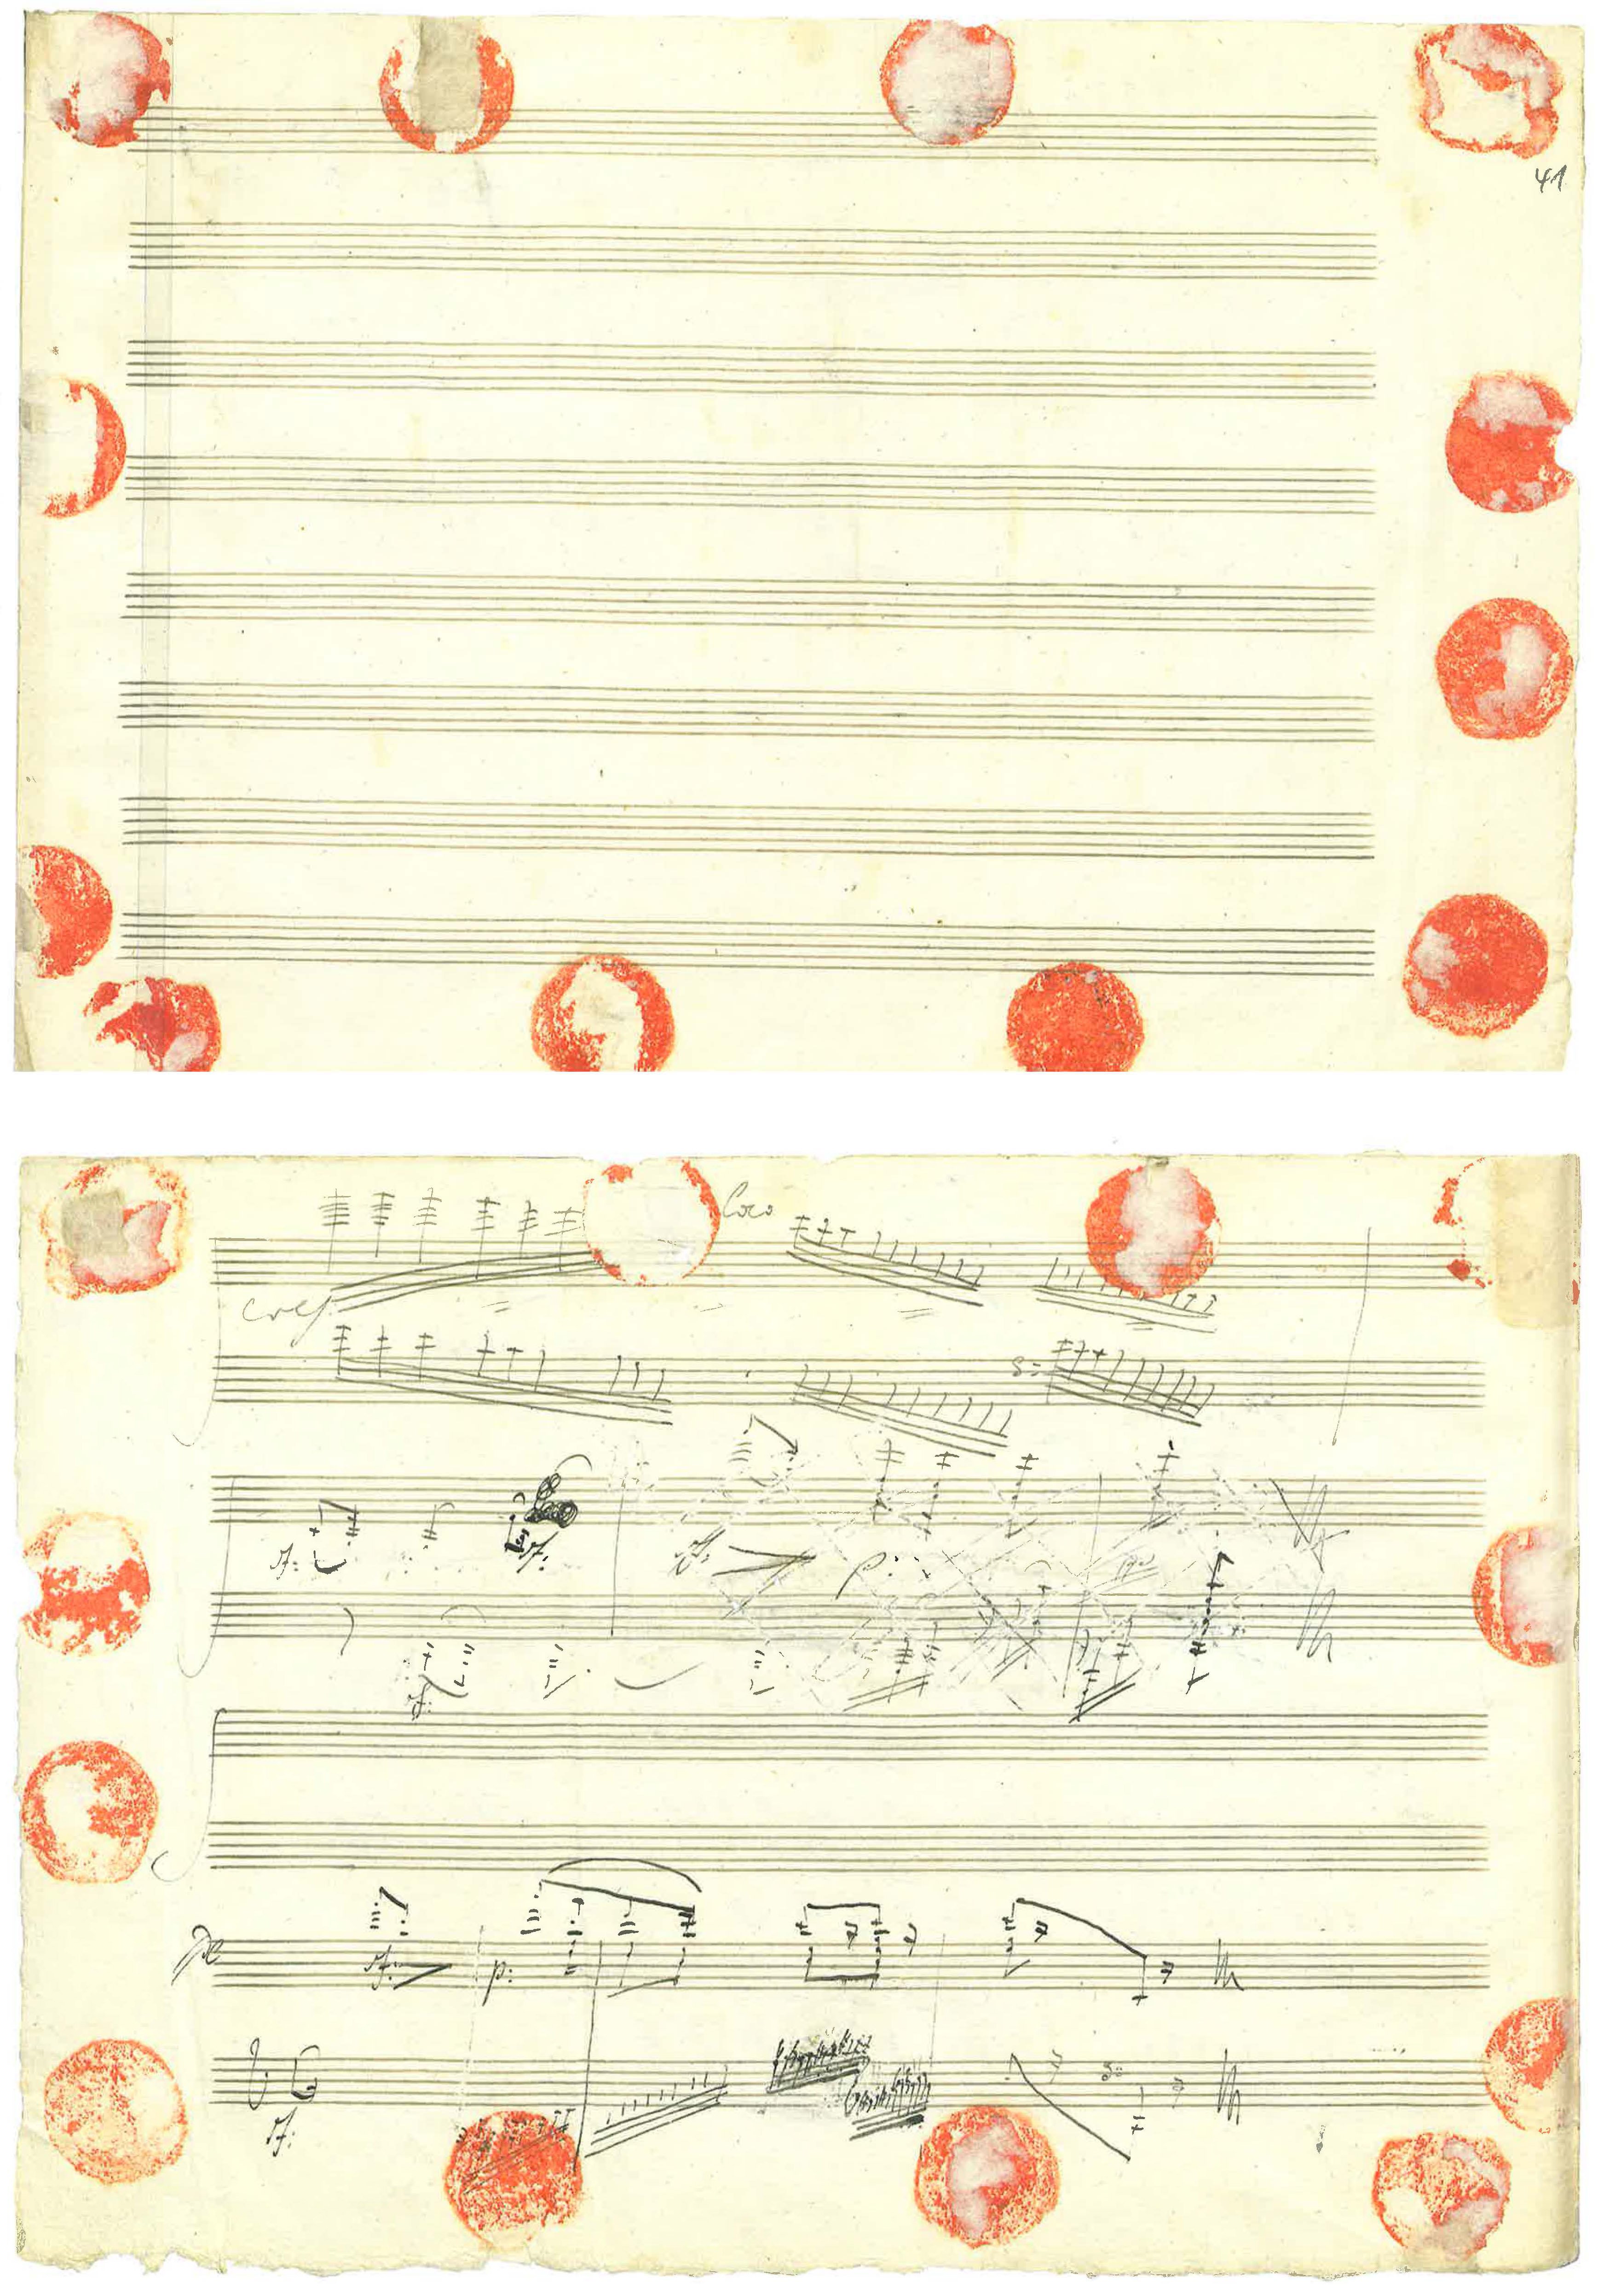 A messy handwritten music score is ringed by orange circles.